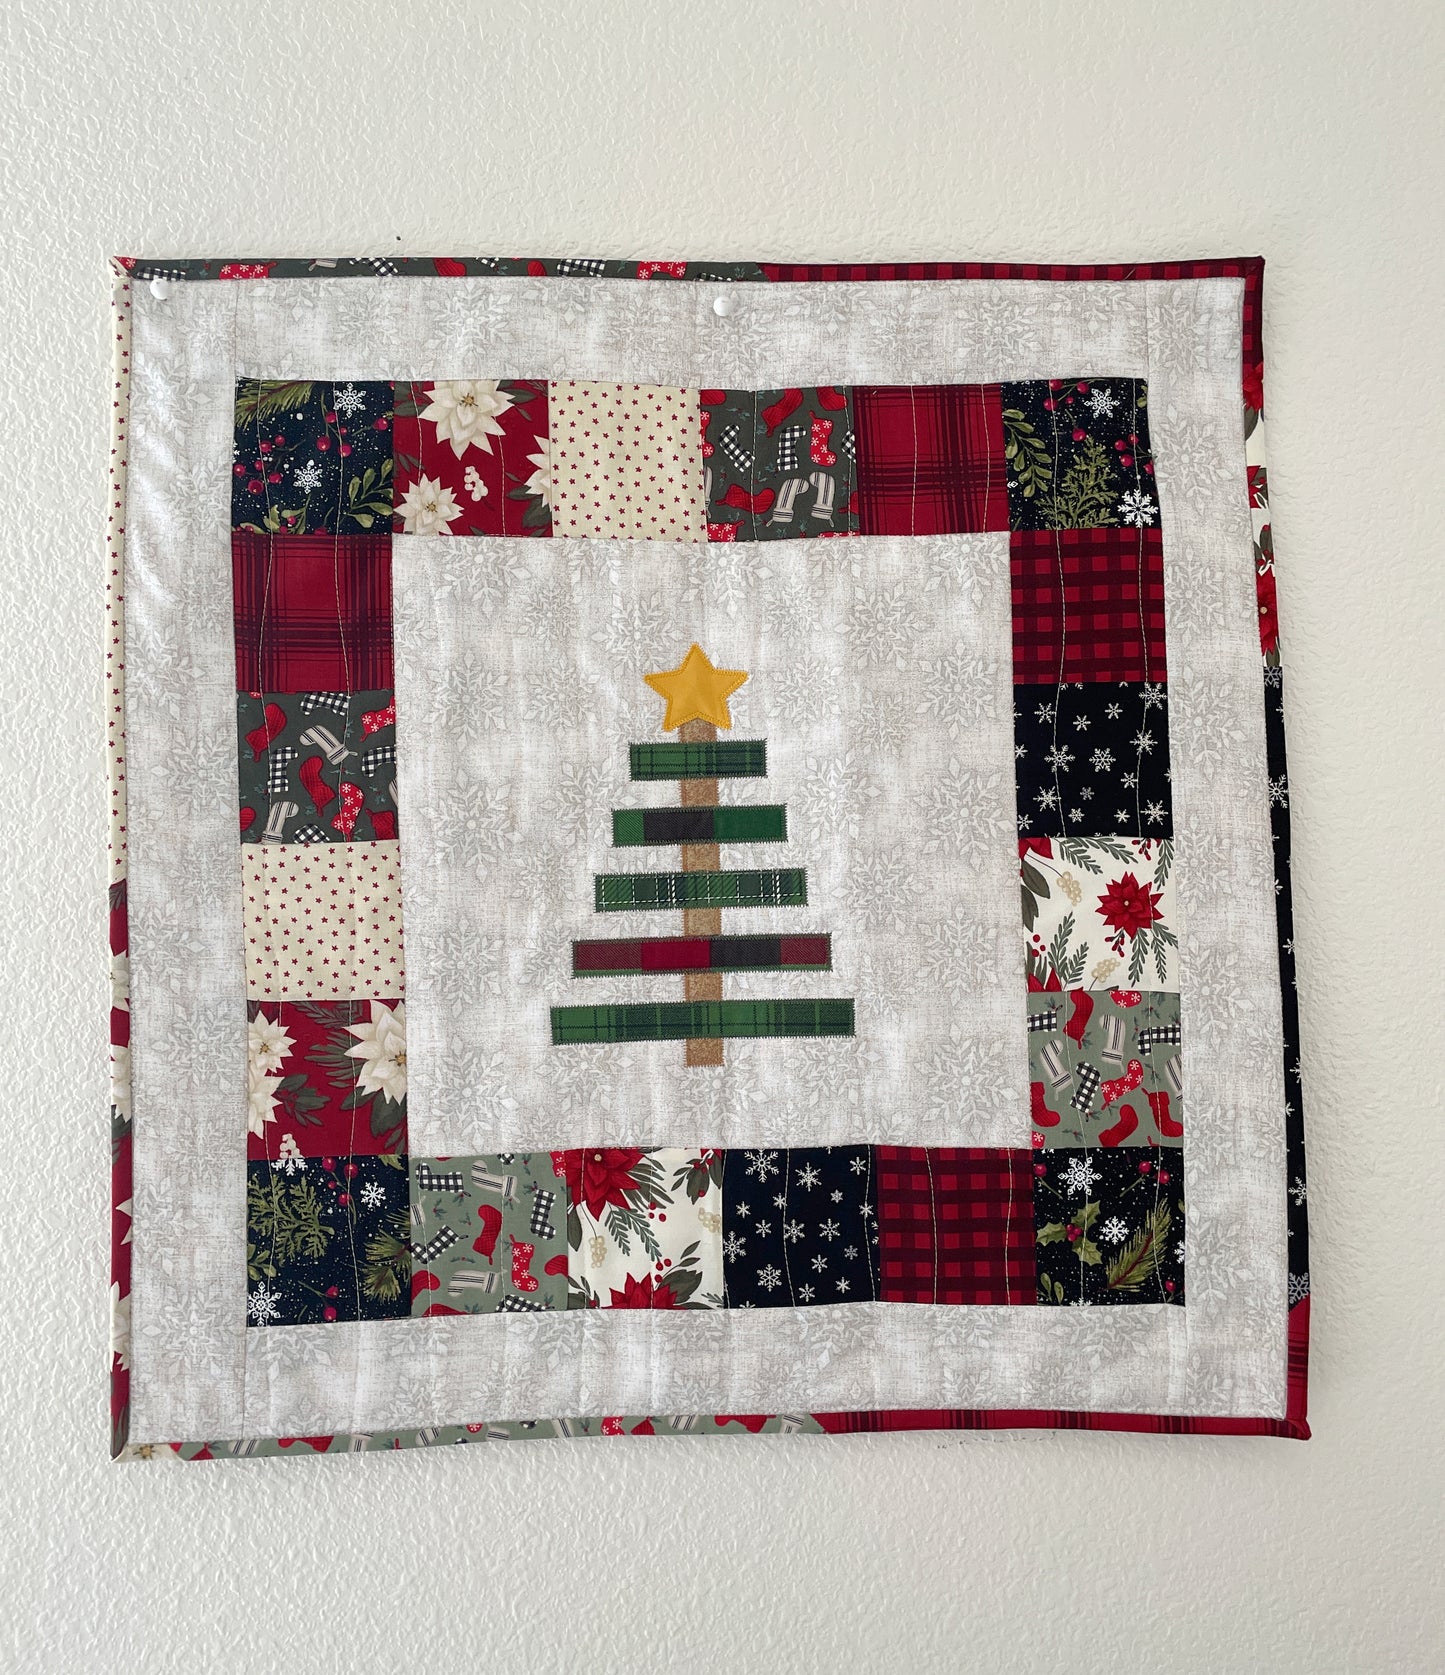 Handmade Quilted Table Topper or Wall Art Holiday Decor